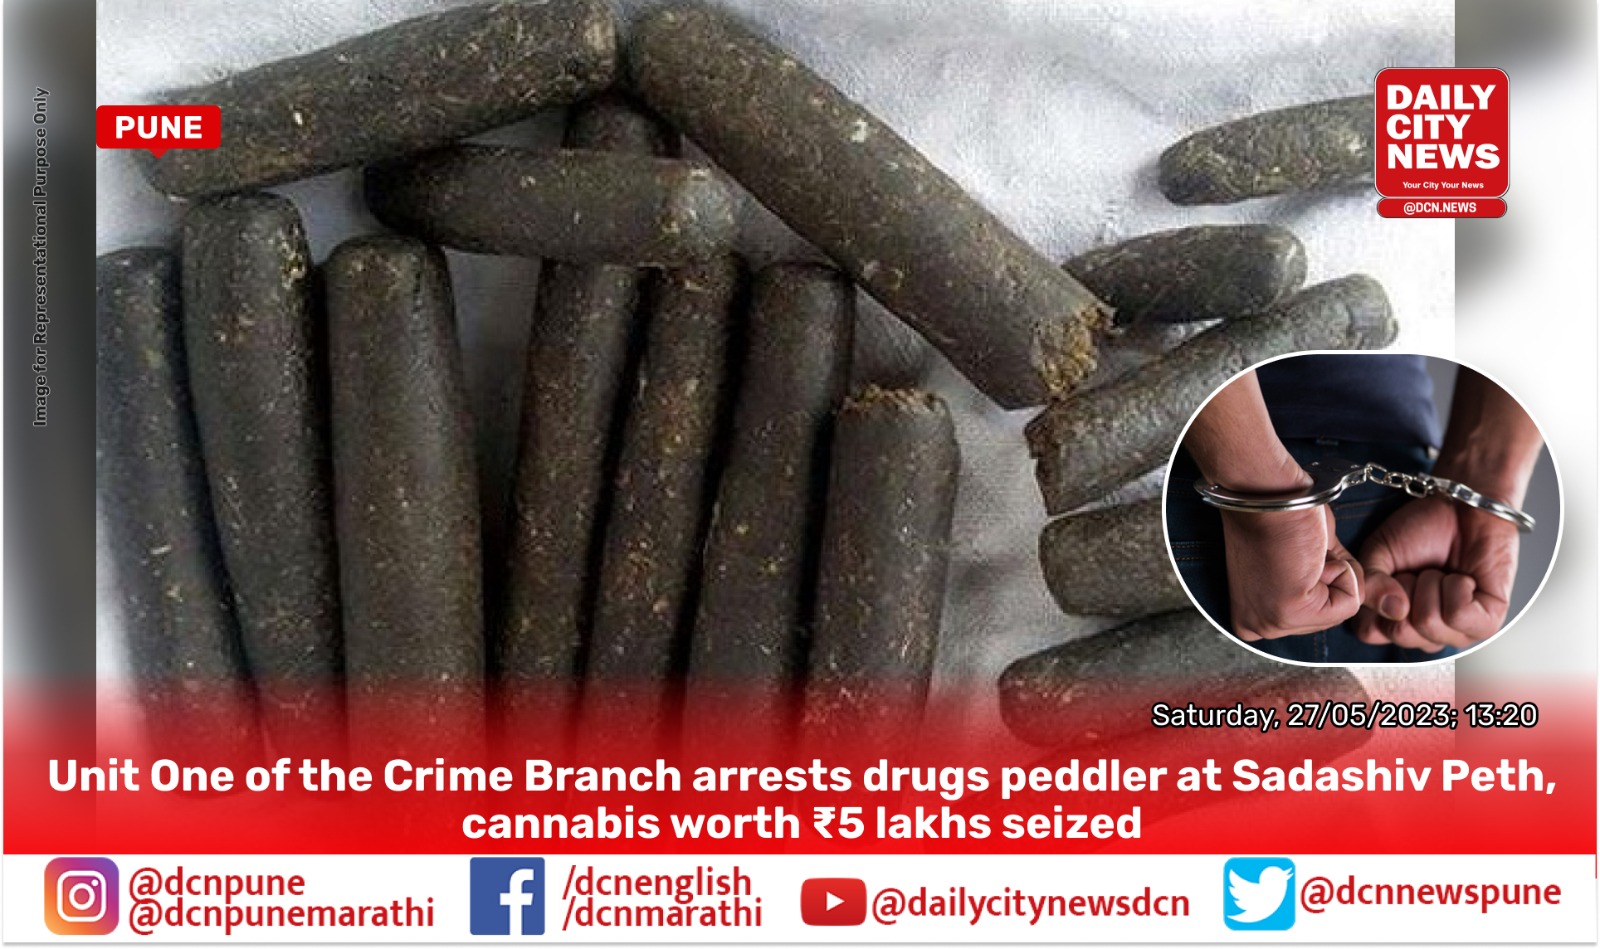 Unit One of the Crime Branch arrests drugs peddler at Sadashiv Peth, cannabis worth ₹5 lakhs seized